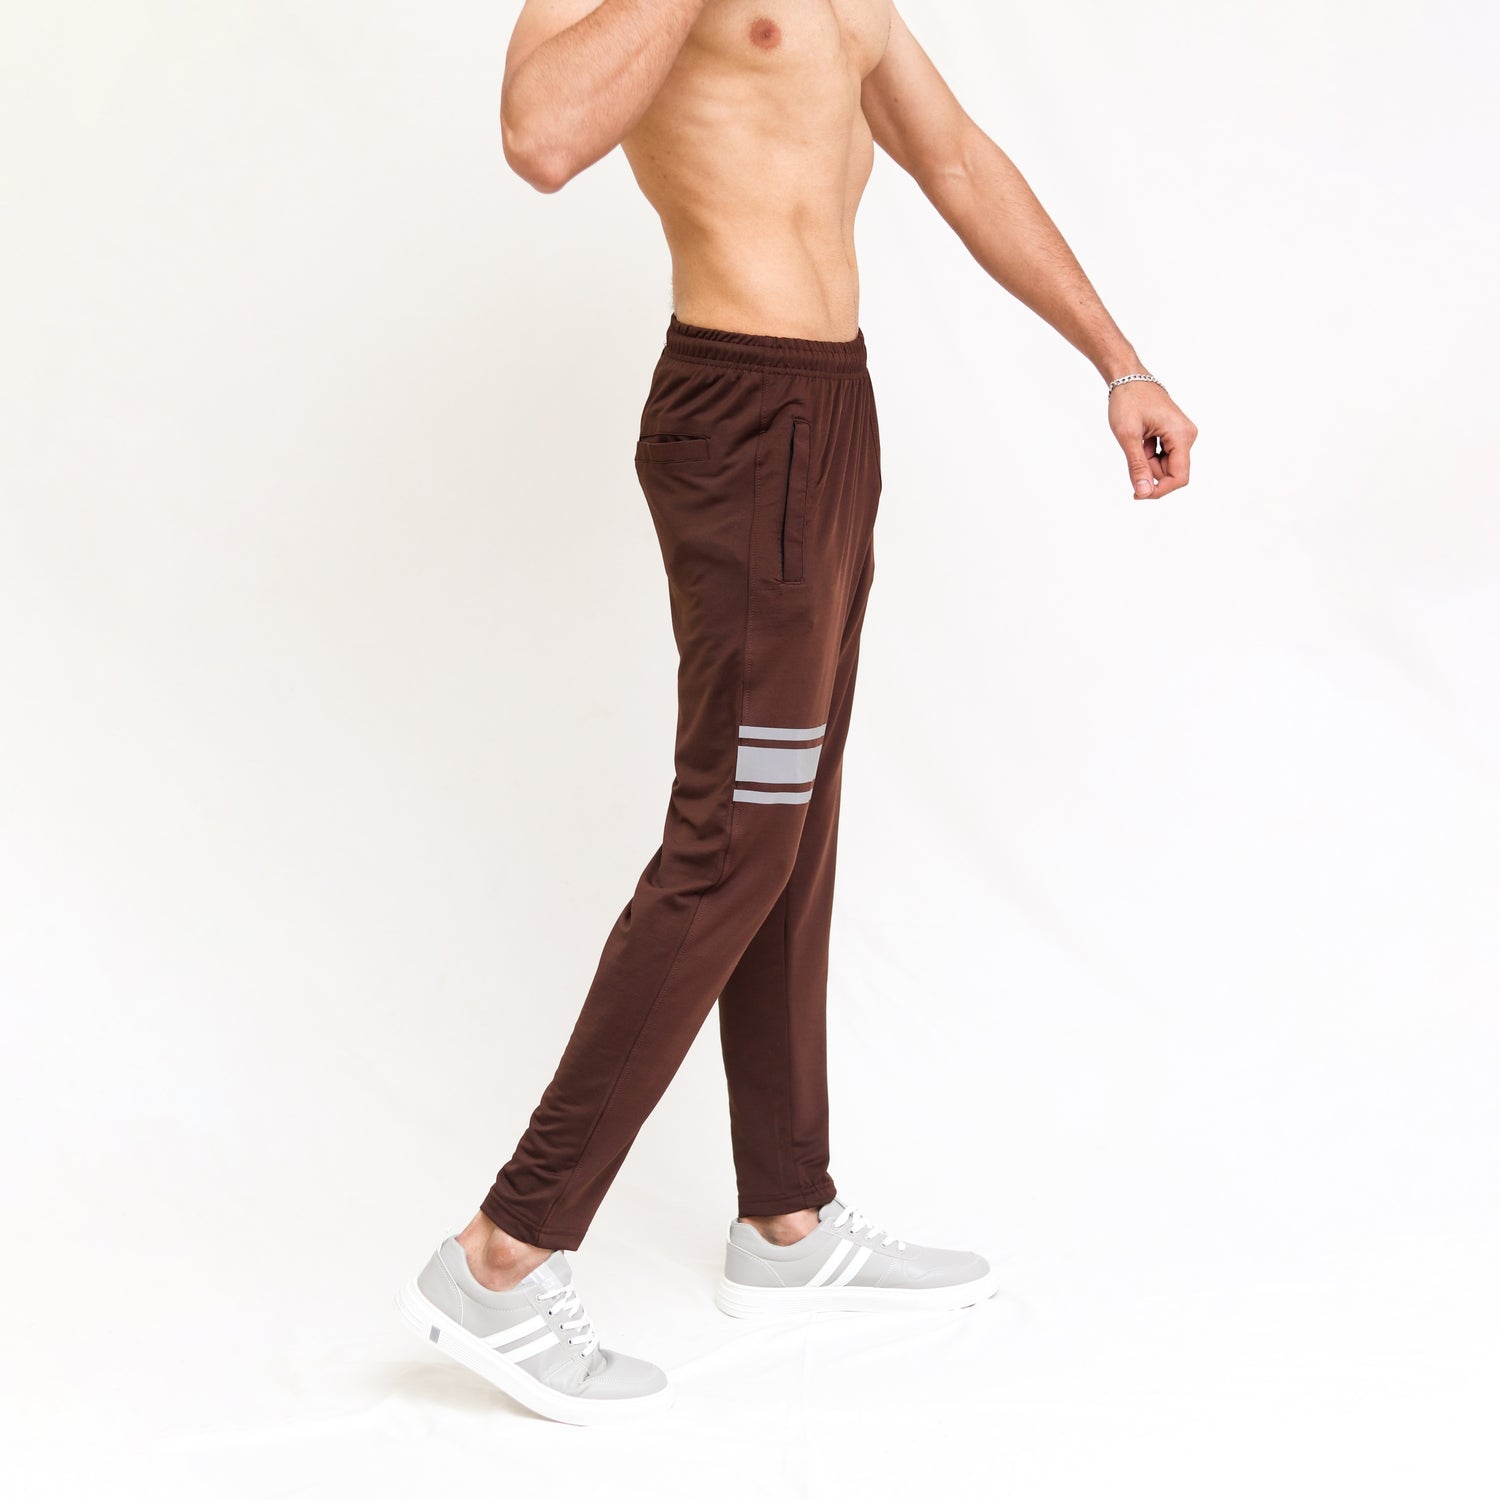 Brown Lycra Quick Dry Trouser with Three Stripes